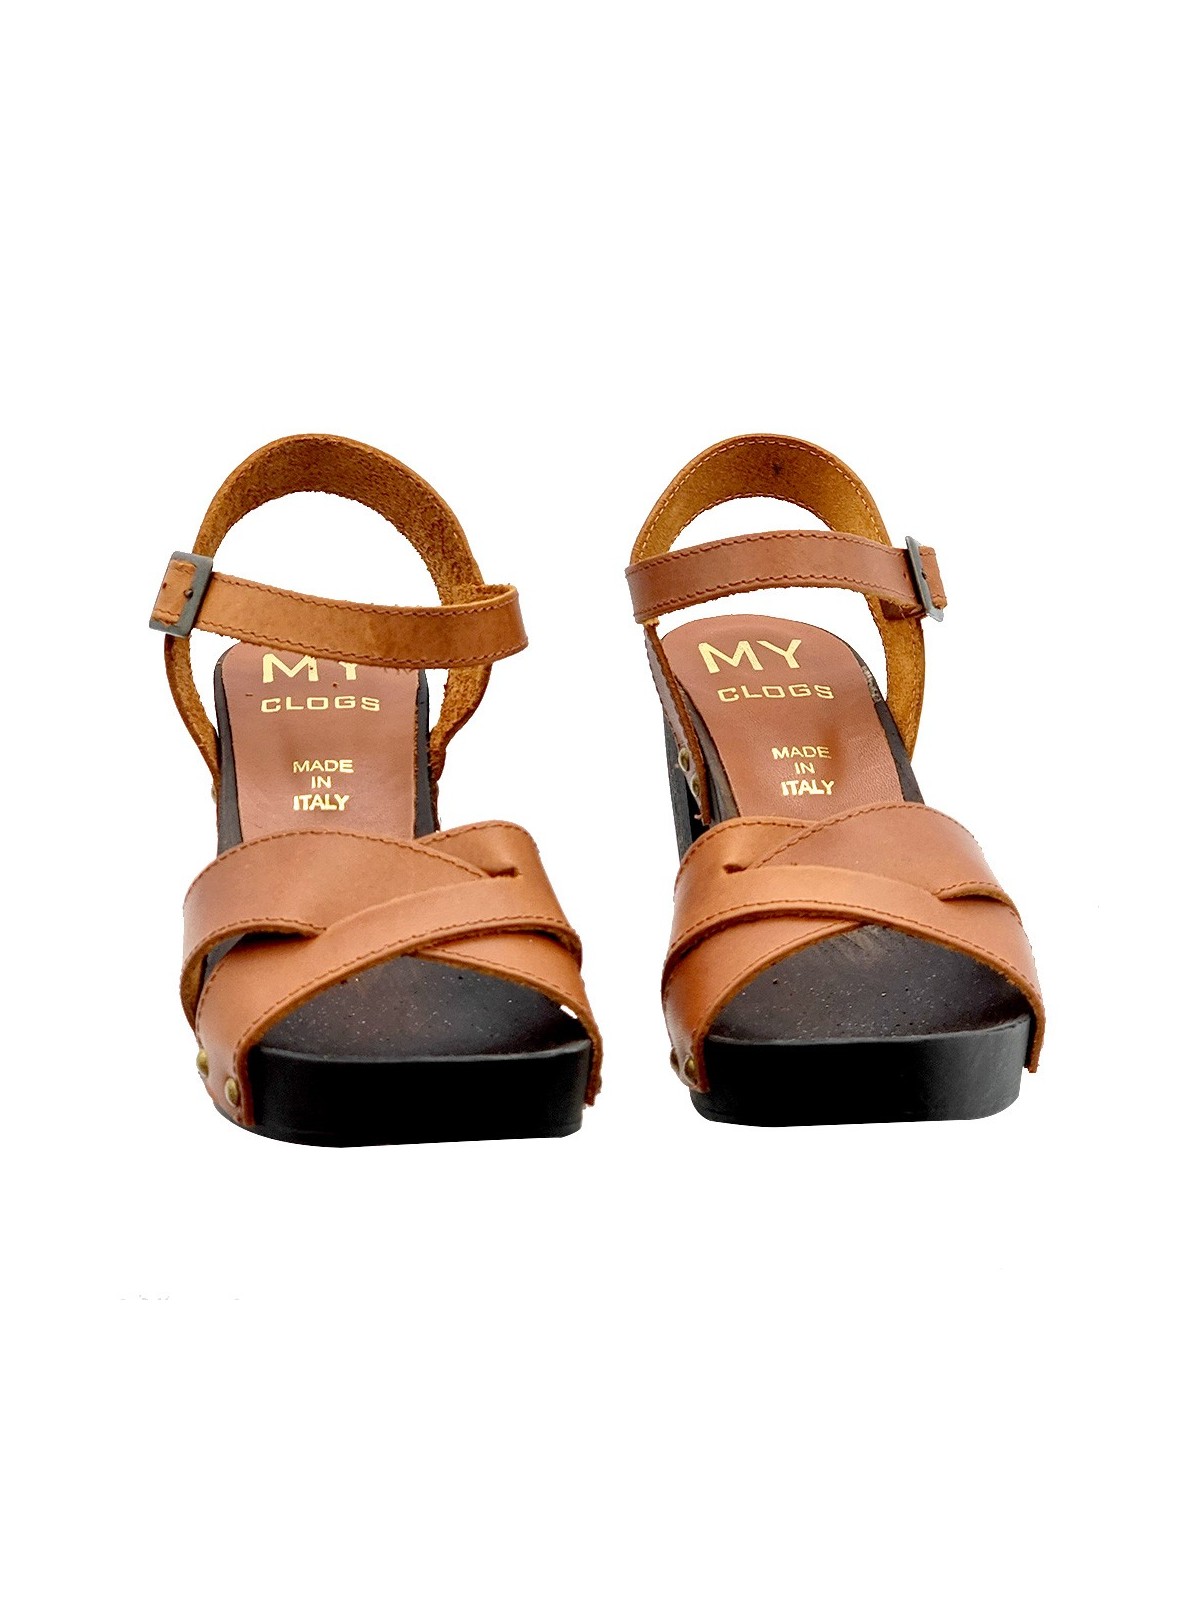 BROWN LEATHER SANDALS WITH CROSSED BANDS